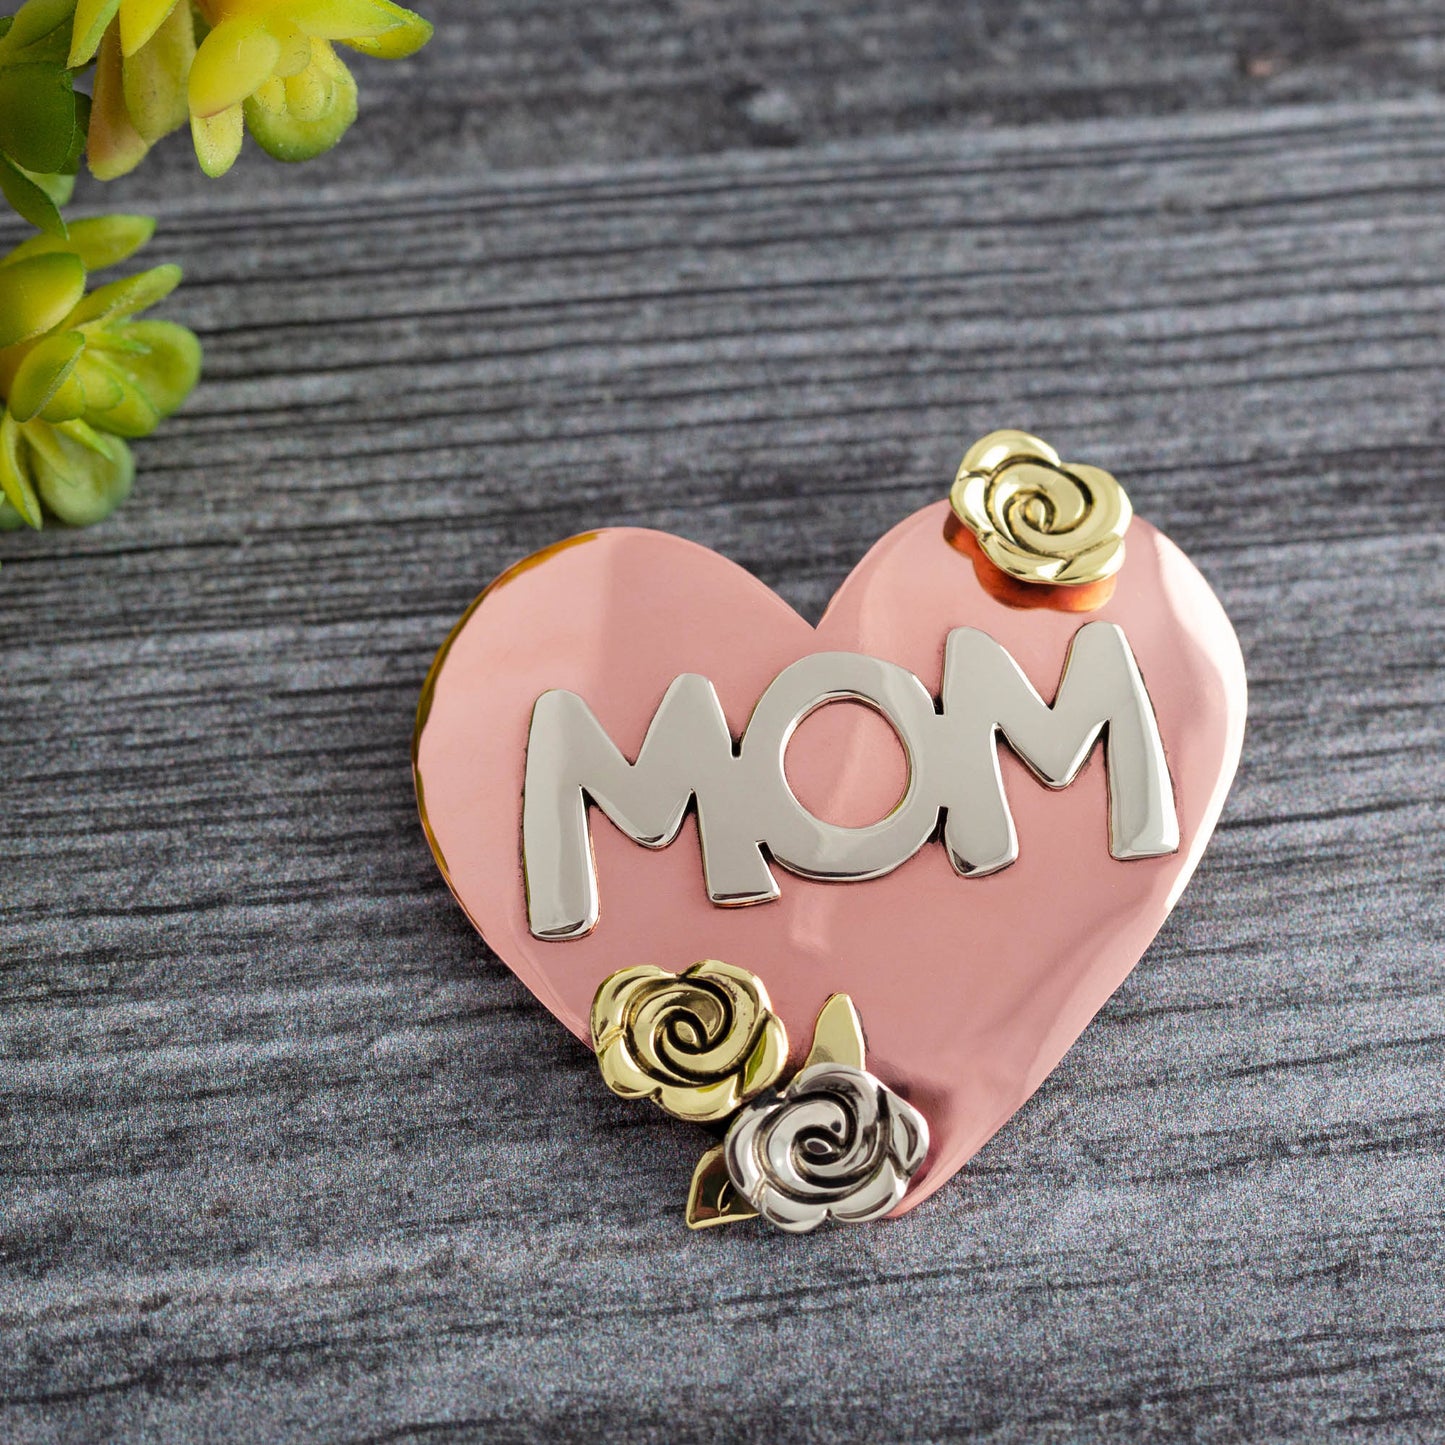 Best Mom Mixed Metal Pin